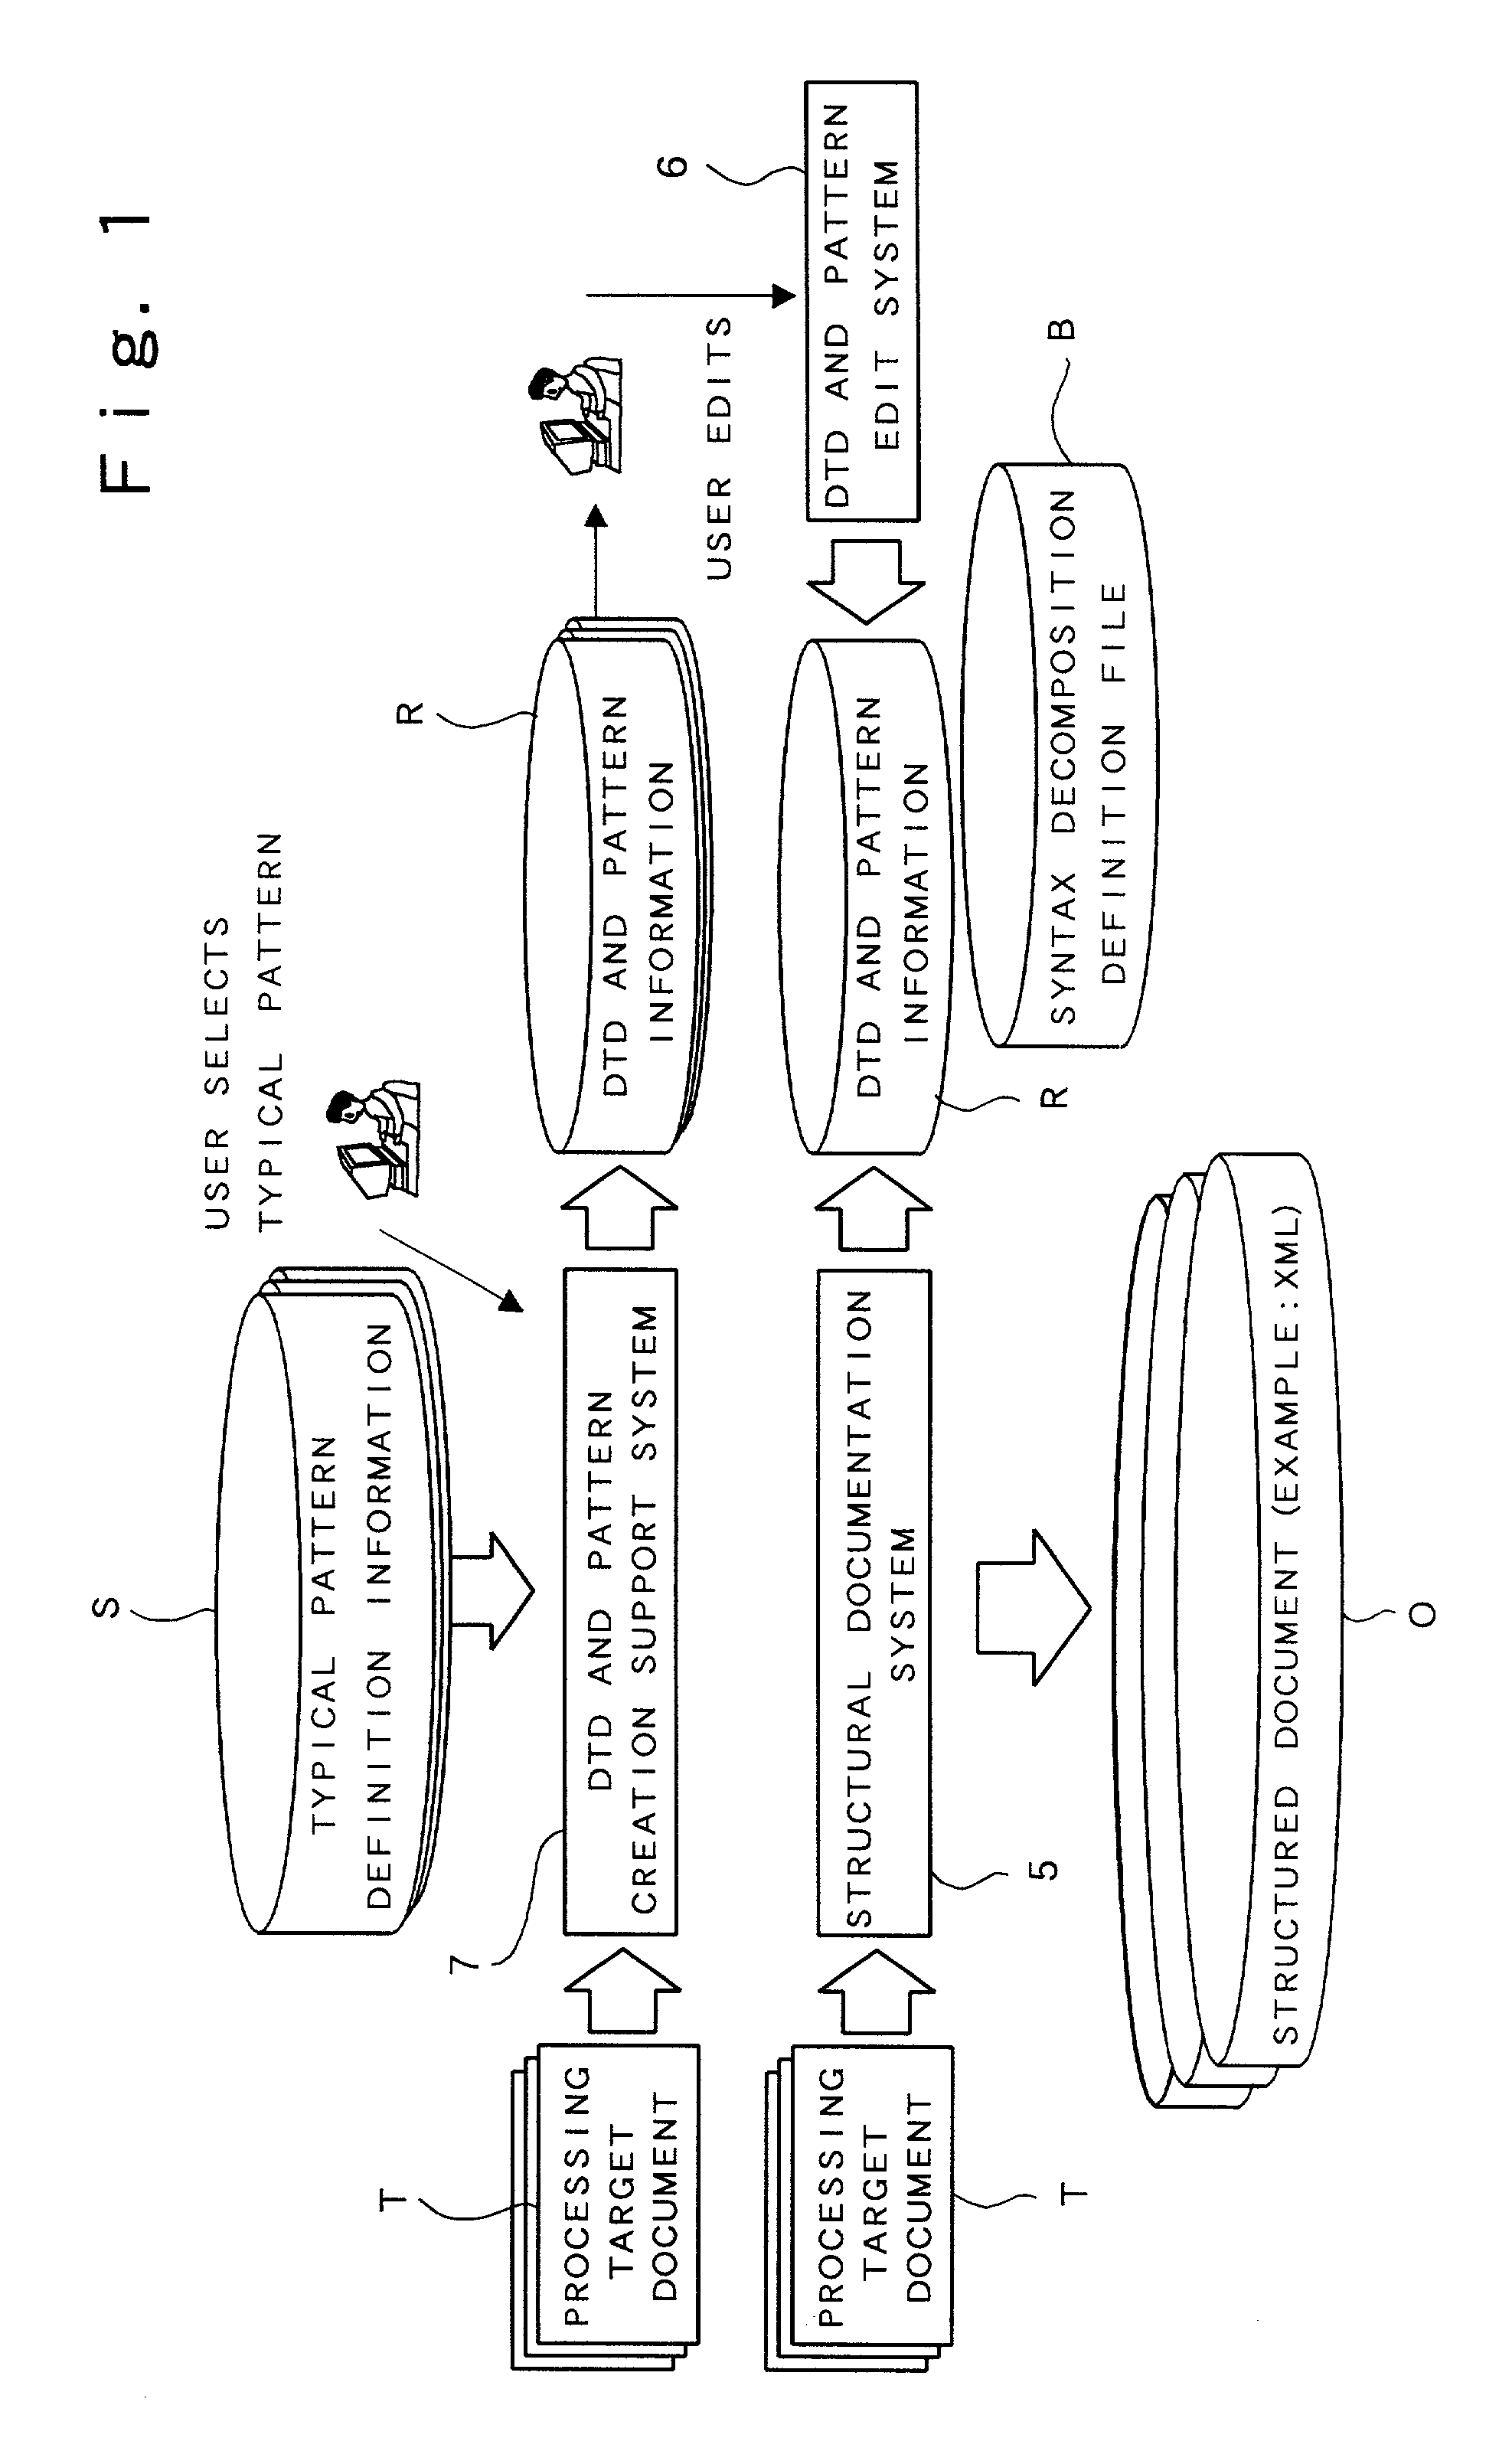 Structural documentation system